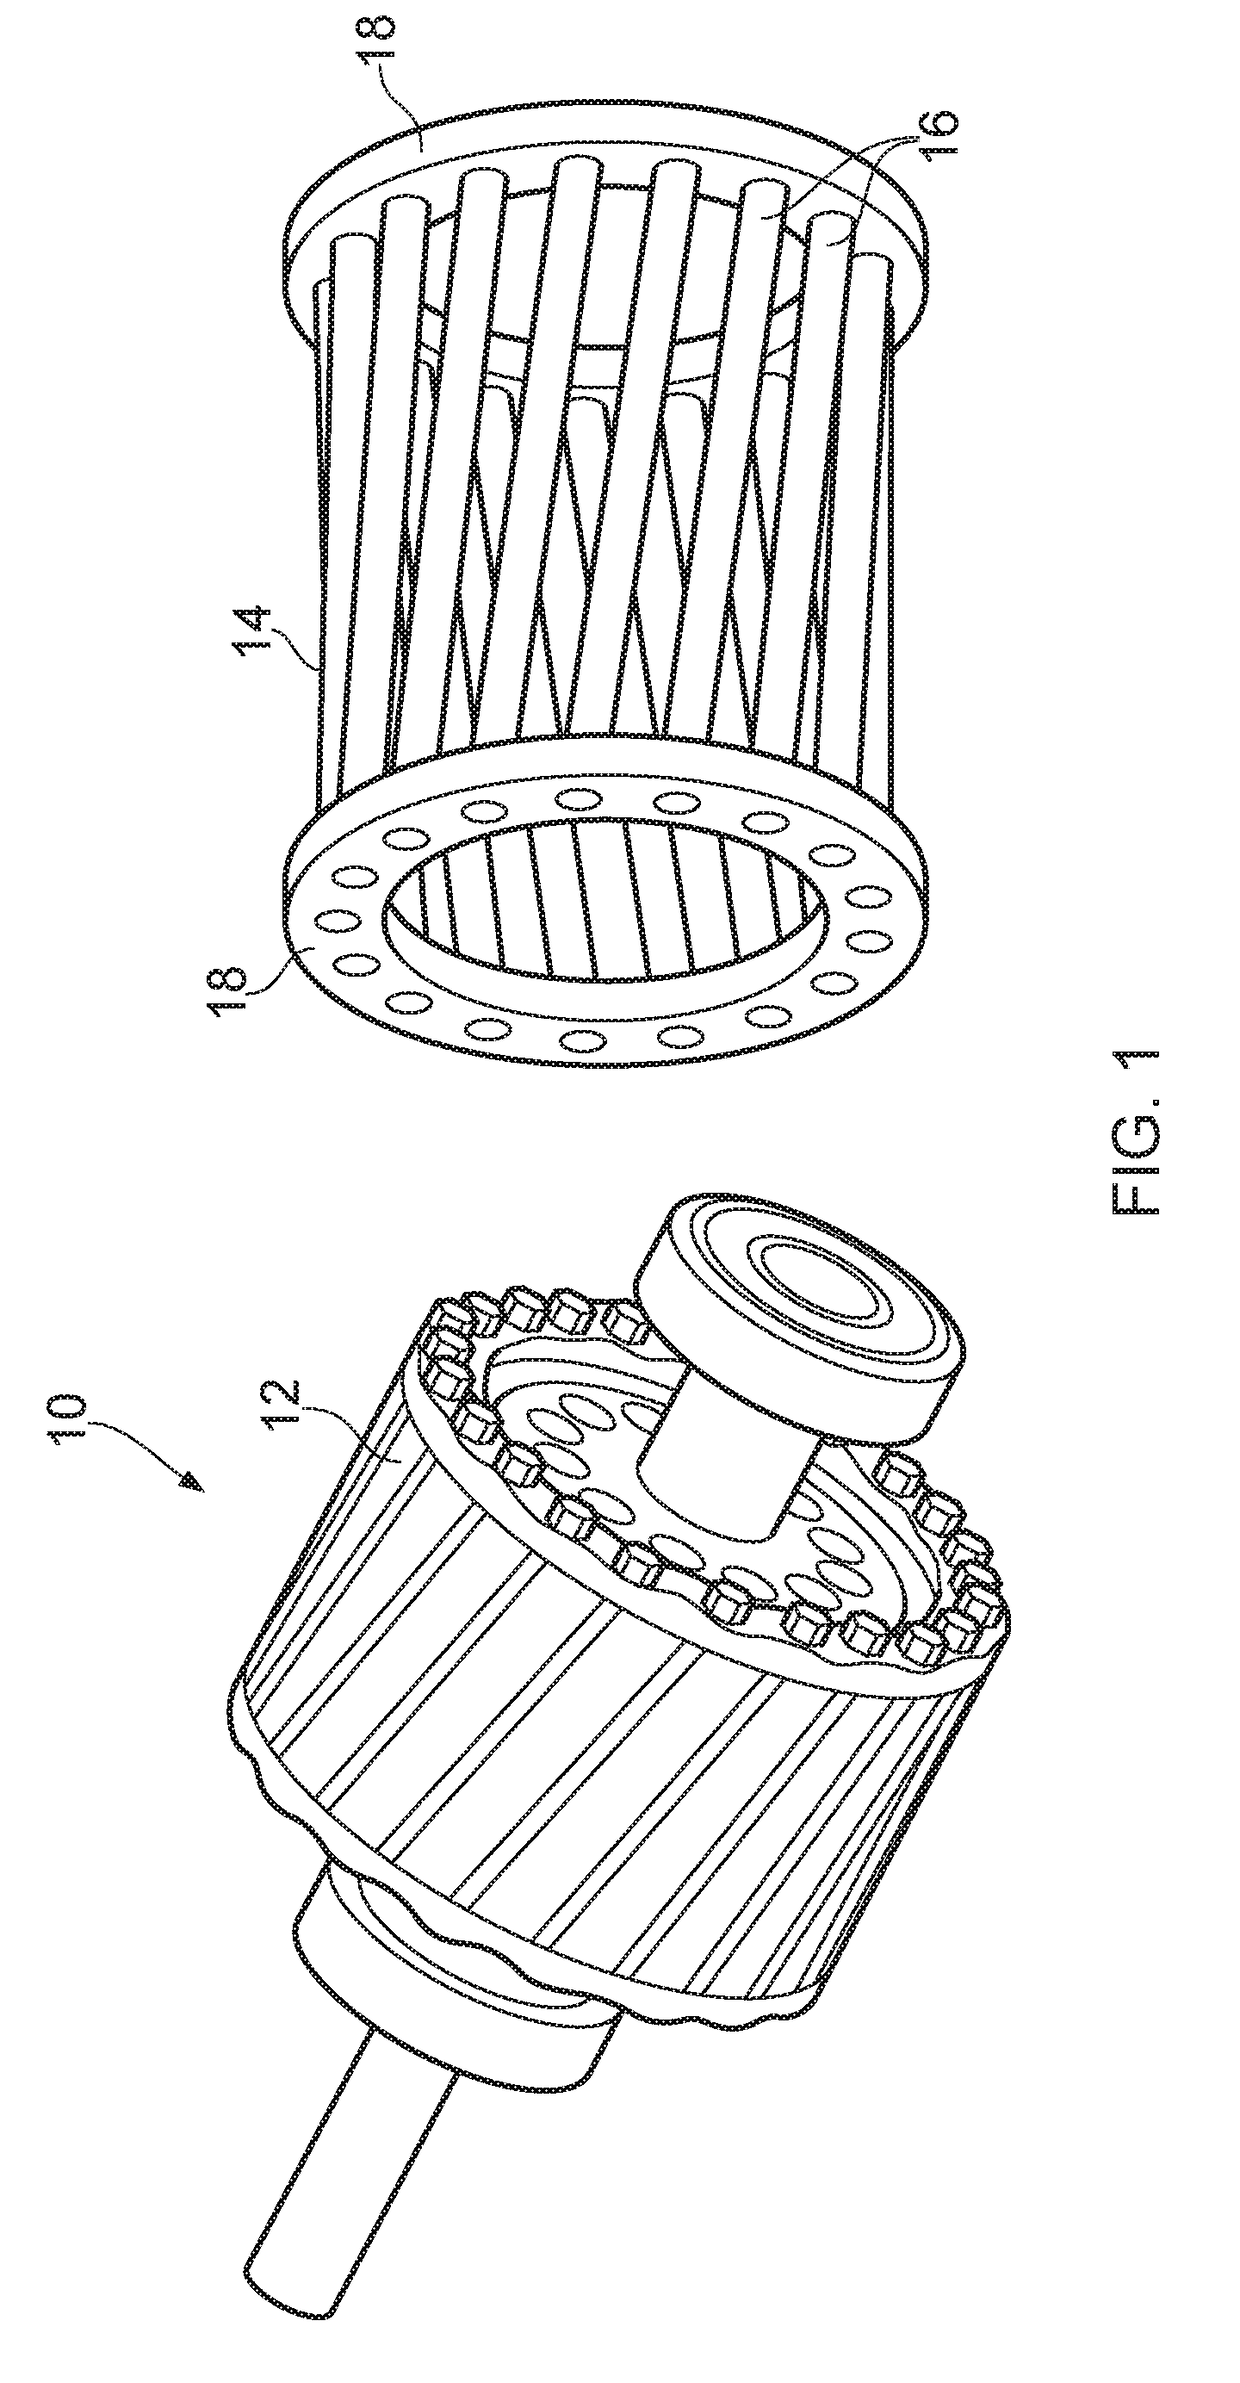 Induction motor rotor and a method of manufacturing the same